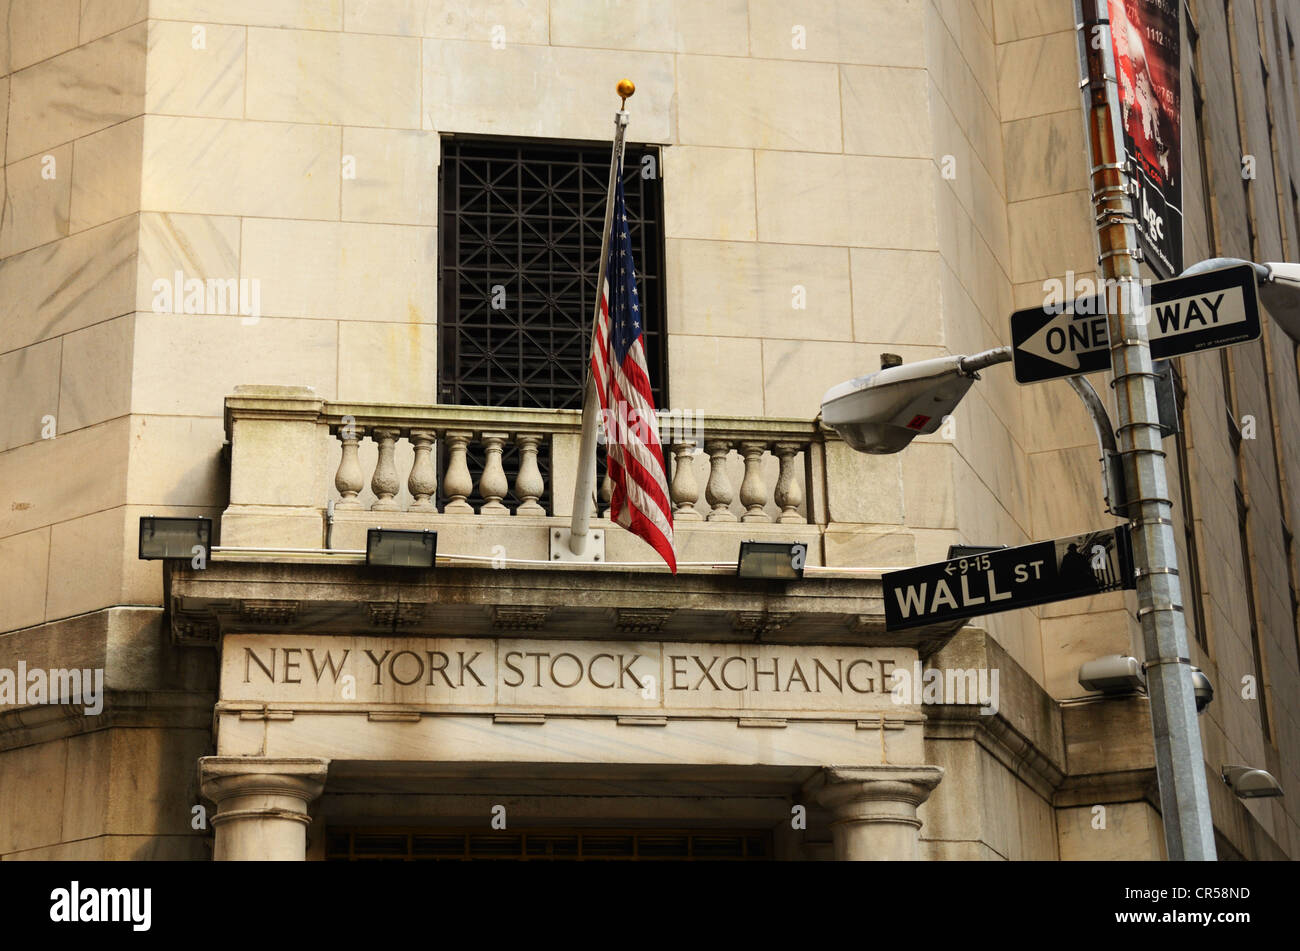 Le New York Stock Exchange sur Wall Street à New York, New York, USA. Banque D'Images